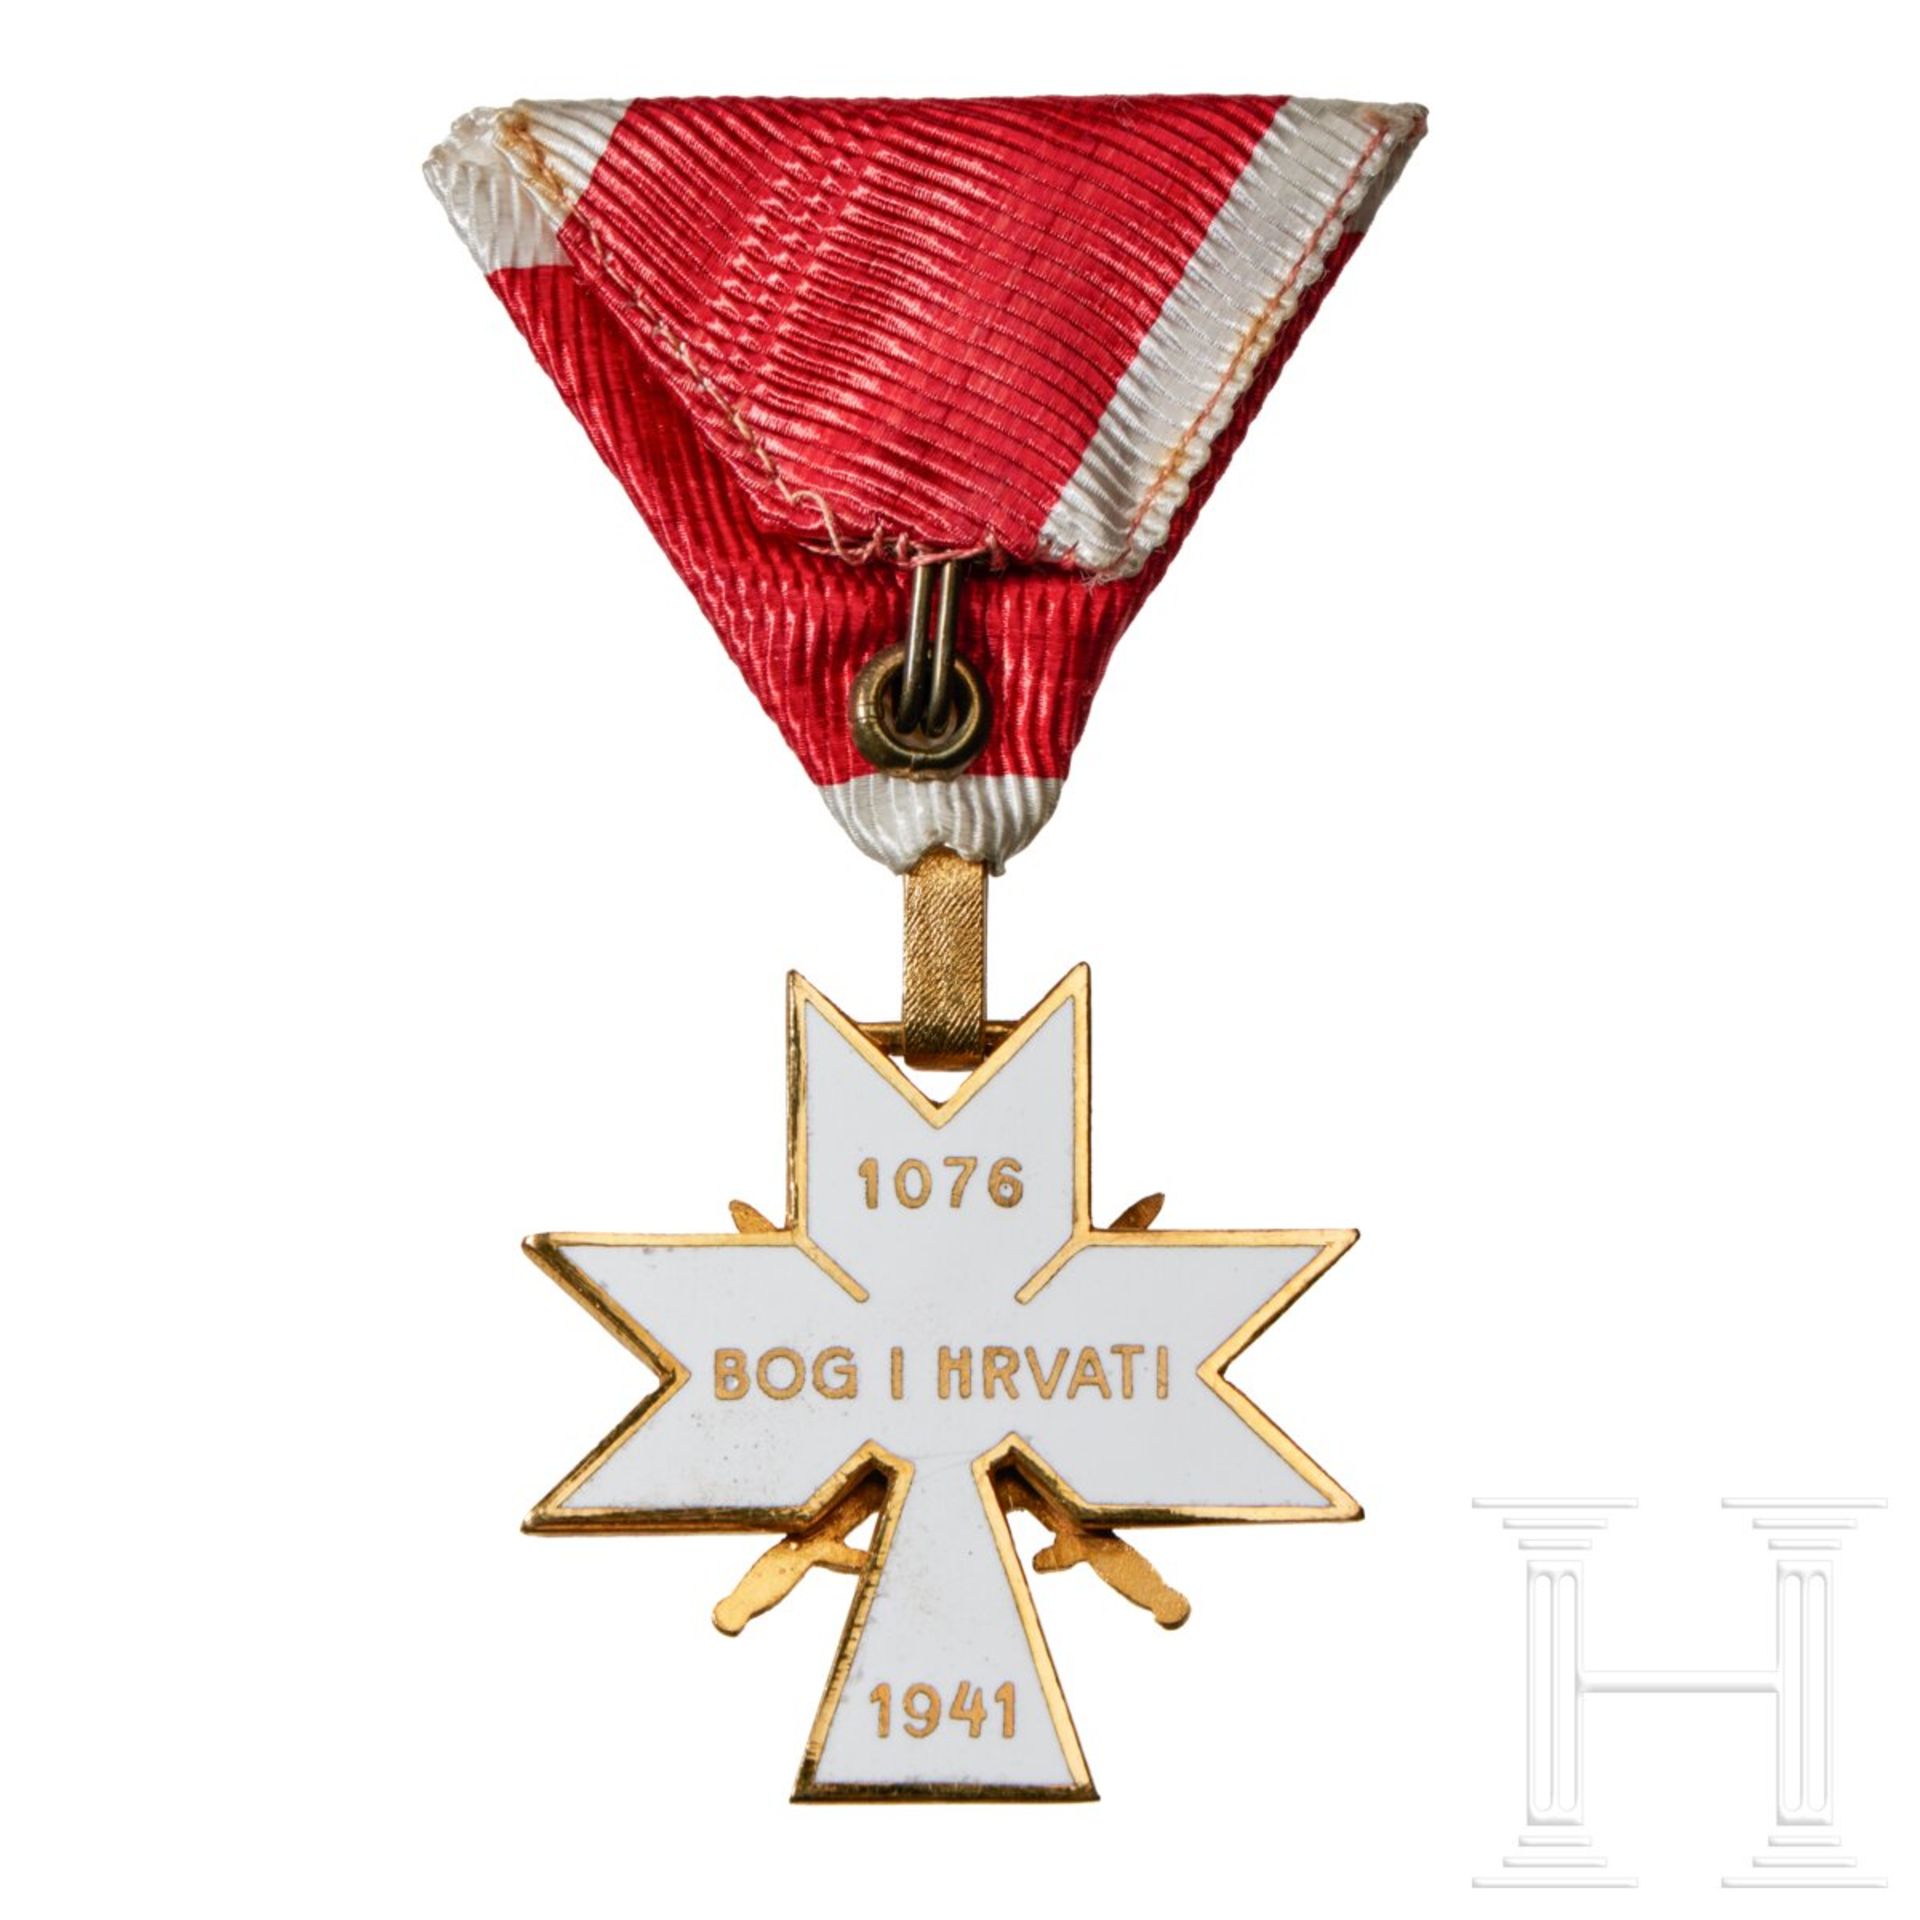 A Croatian Order of King Zvonimir 3rd Class with Swords - Image 3 of 4